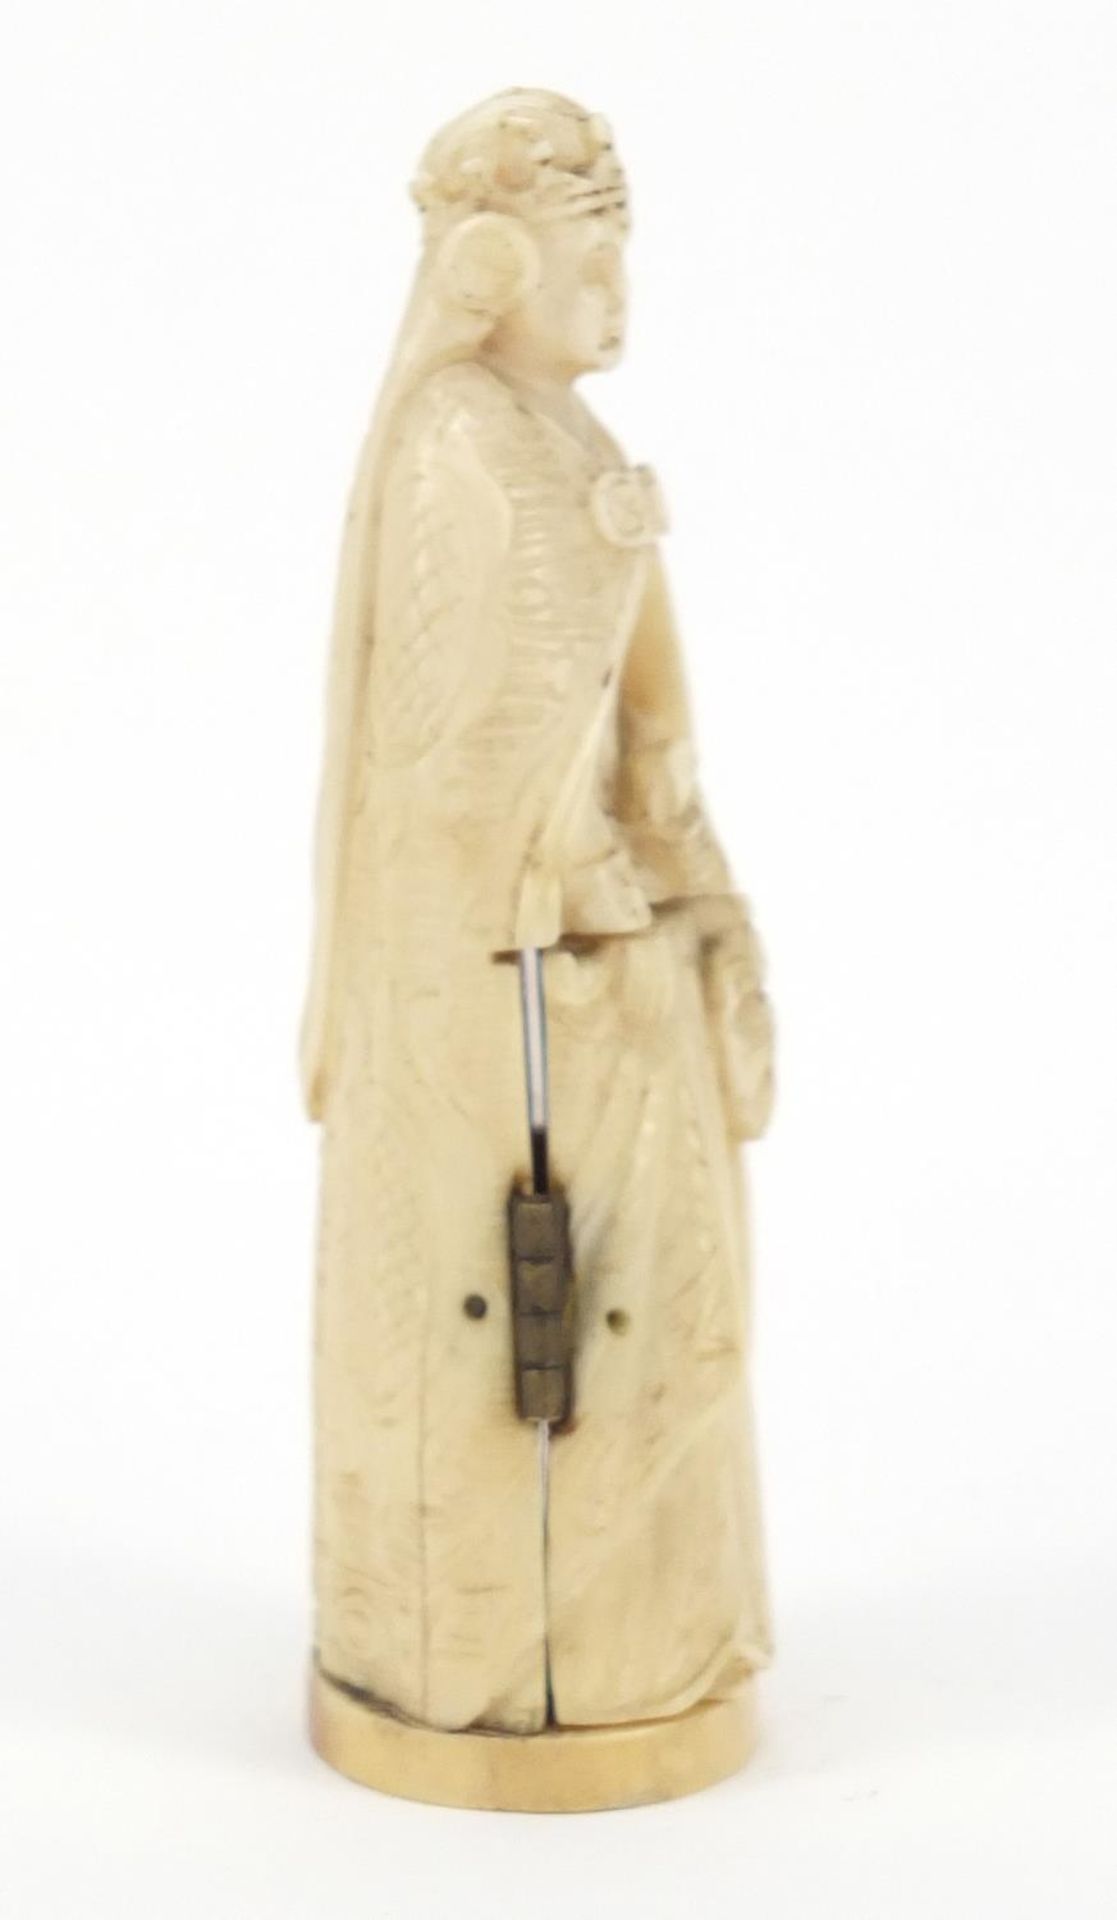 19th century French Dieppe carved ivory tryptych figure, 8.5cm high - Image 7 of 9